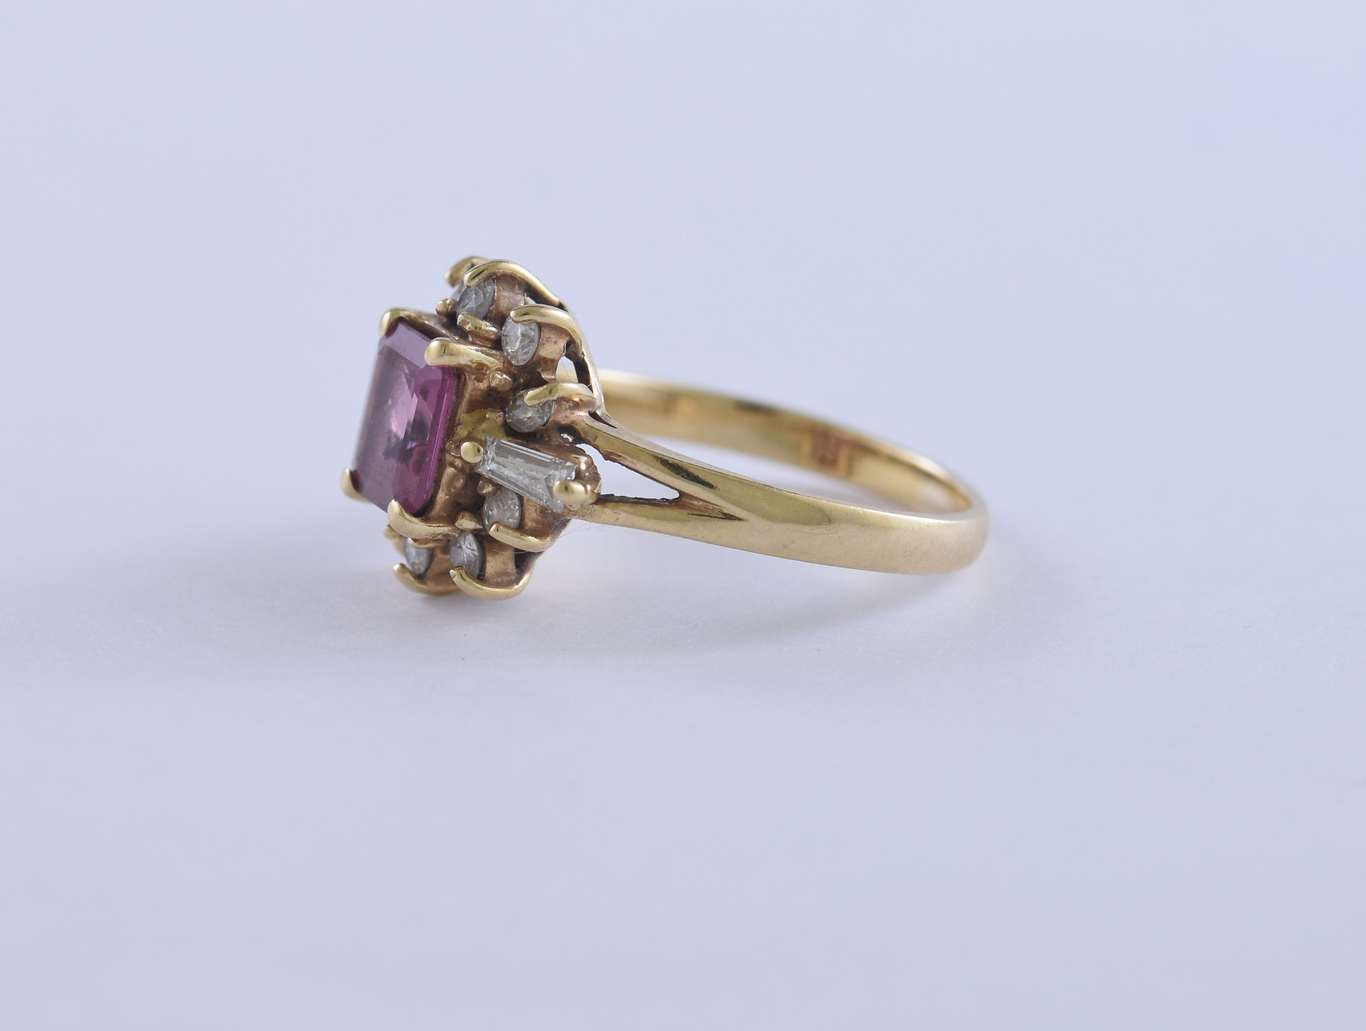 Emerald cut ruby and diamond ting set in 14k yellow gold